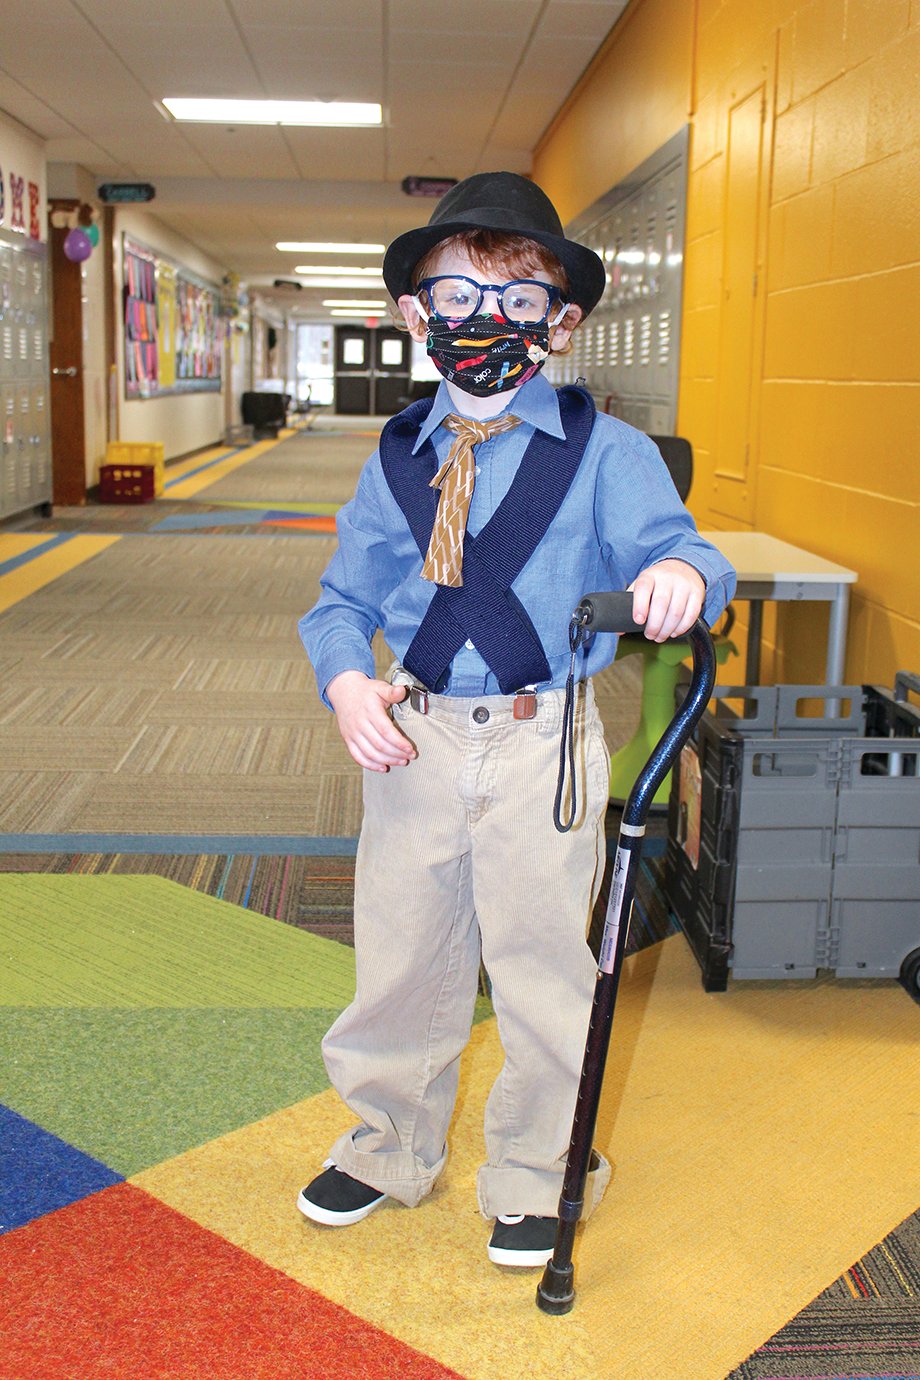 Bentley Turpin uses a cain to get around Monday at Hose Elementary as he and his fellow students celebrate the 100th day of the school year.